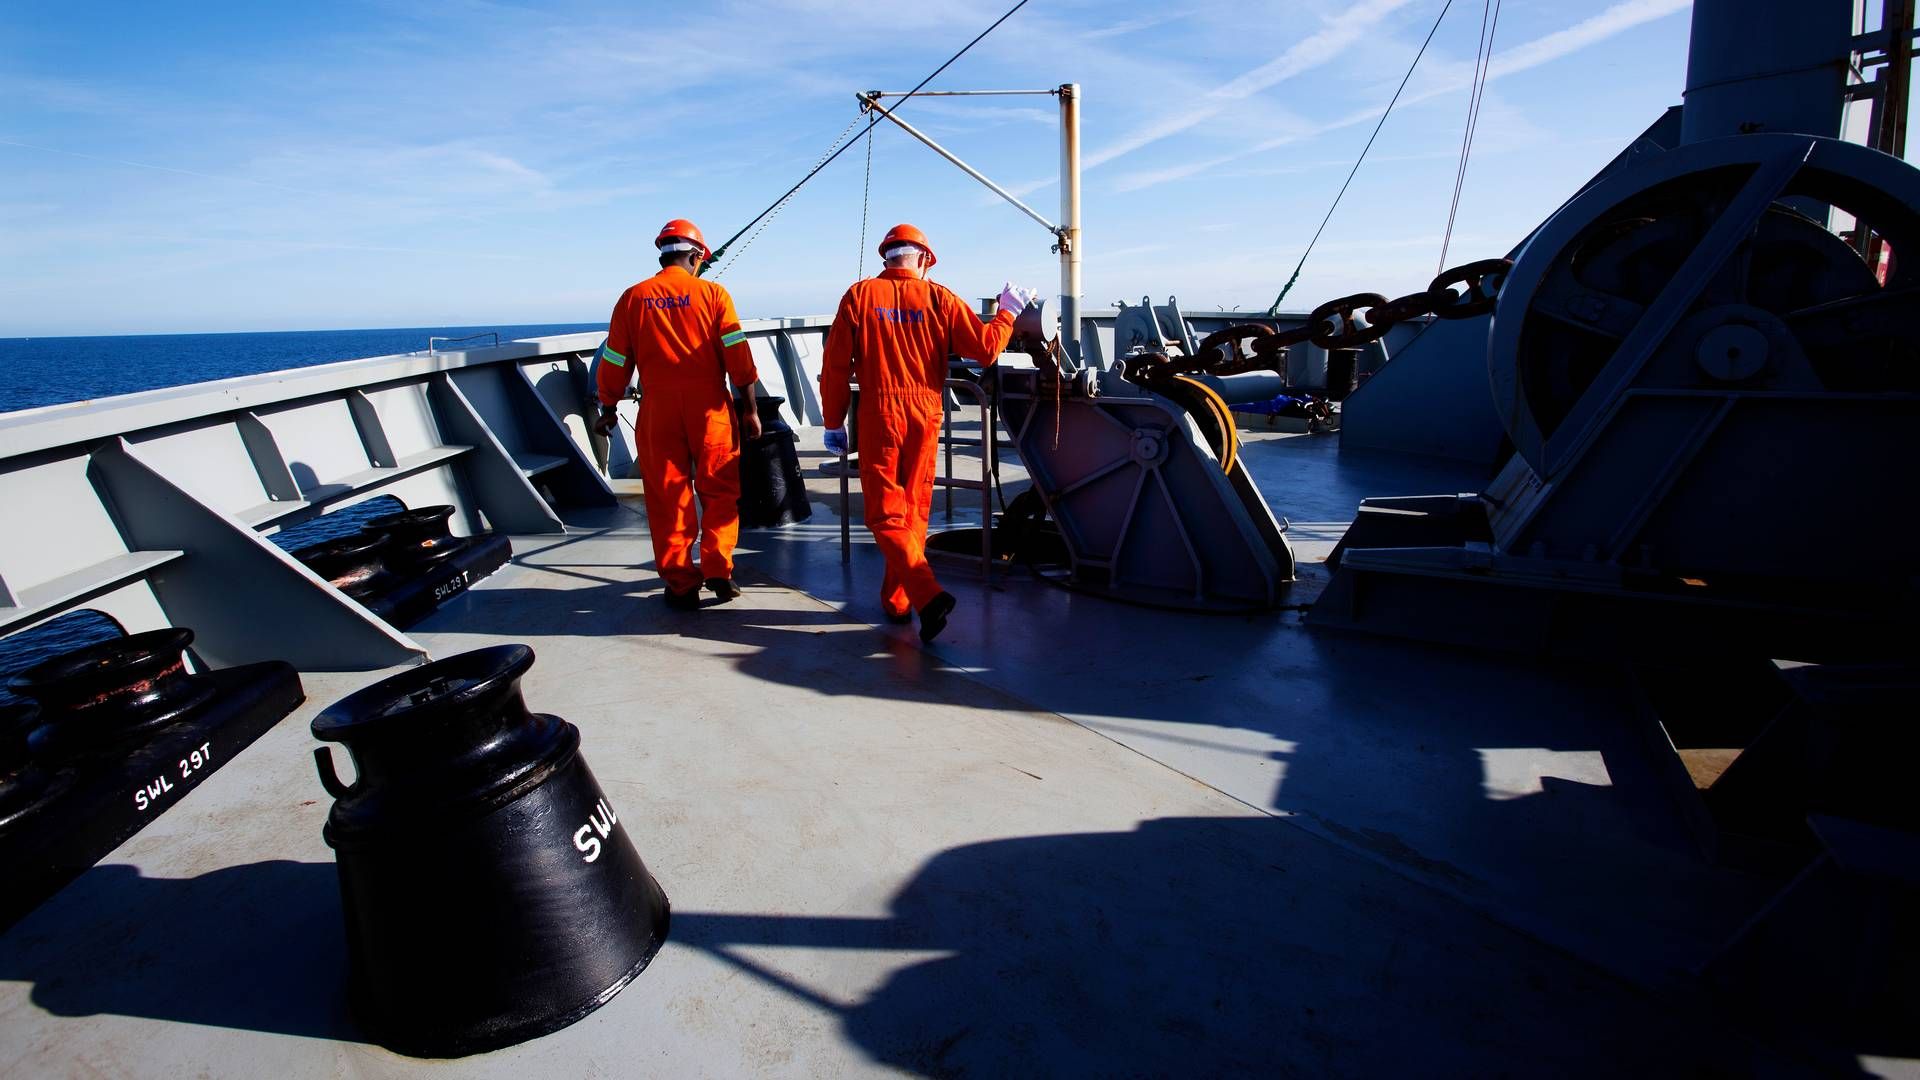 The main purpose of the proposal is to ensure a fair and decent labor market in Norwegian waters and on the Norwegian continental shelf. | Photo: Pr / Torm